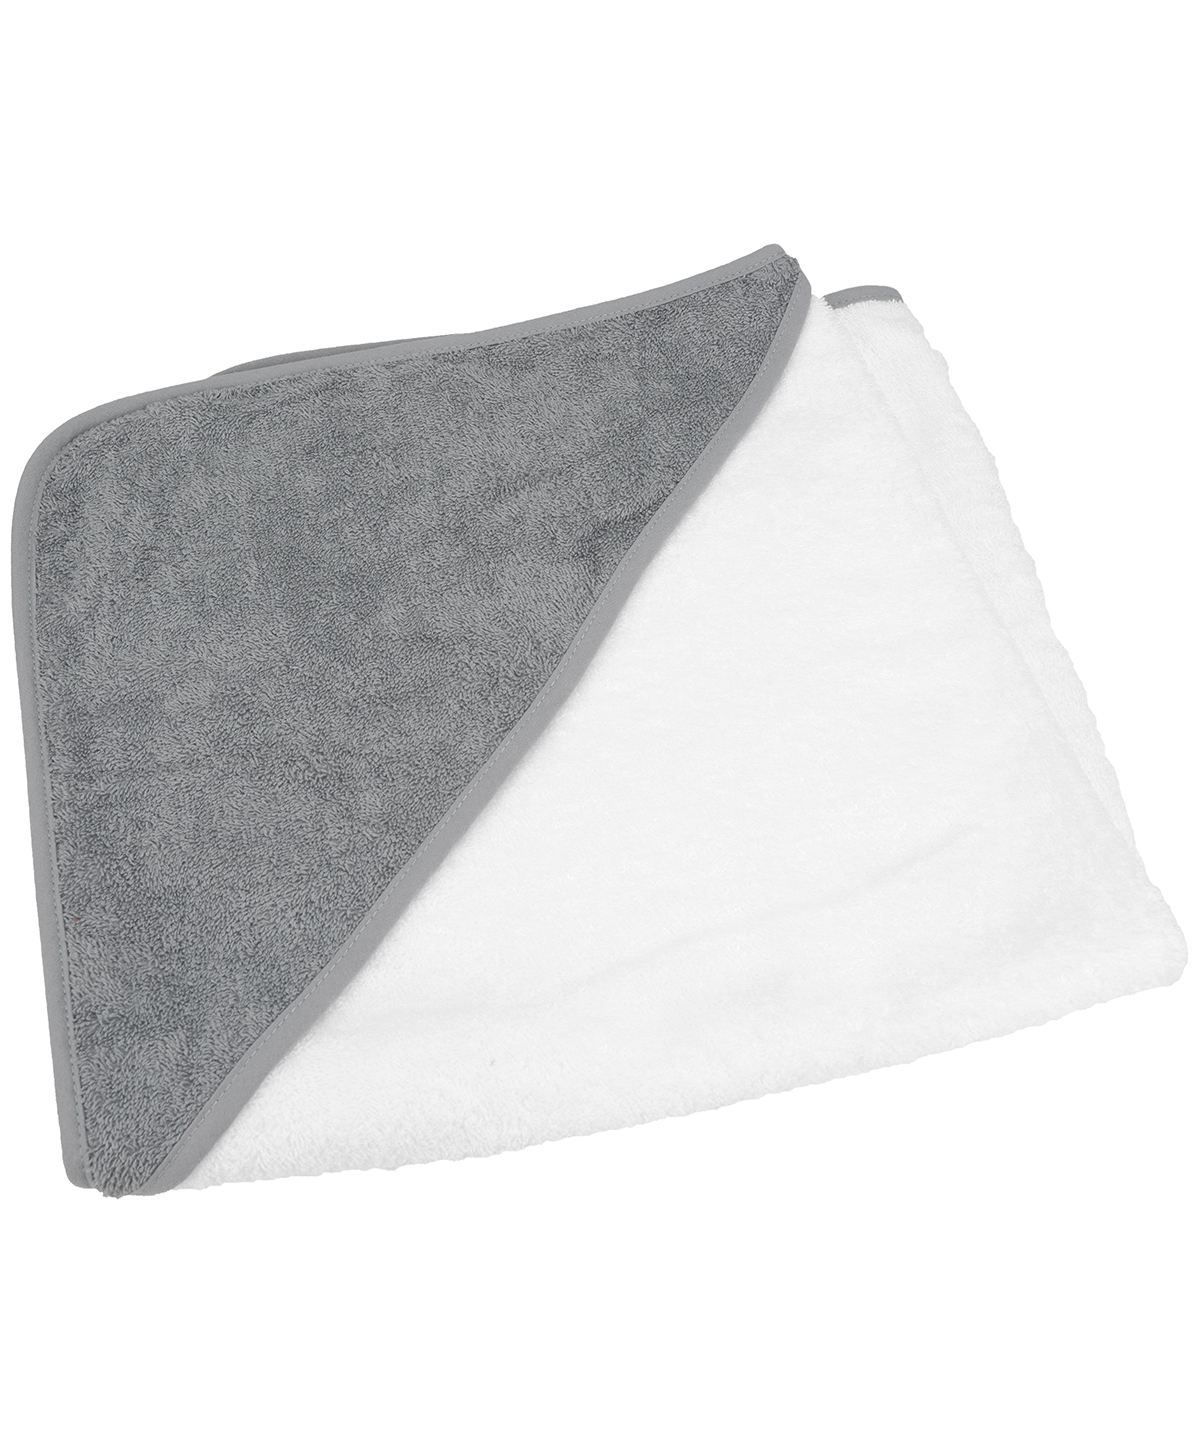 Babiezz® Medium Baby Hooded Towel White/Anthracite Grey/Anthracite Grey Size One Size